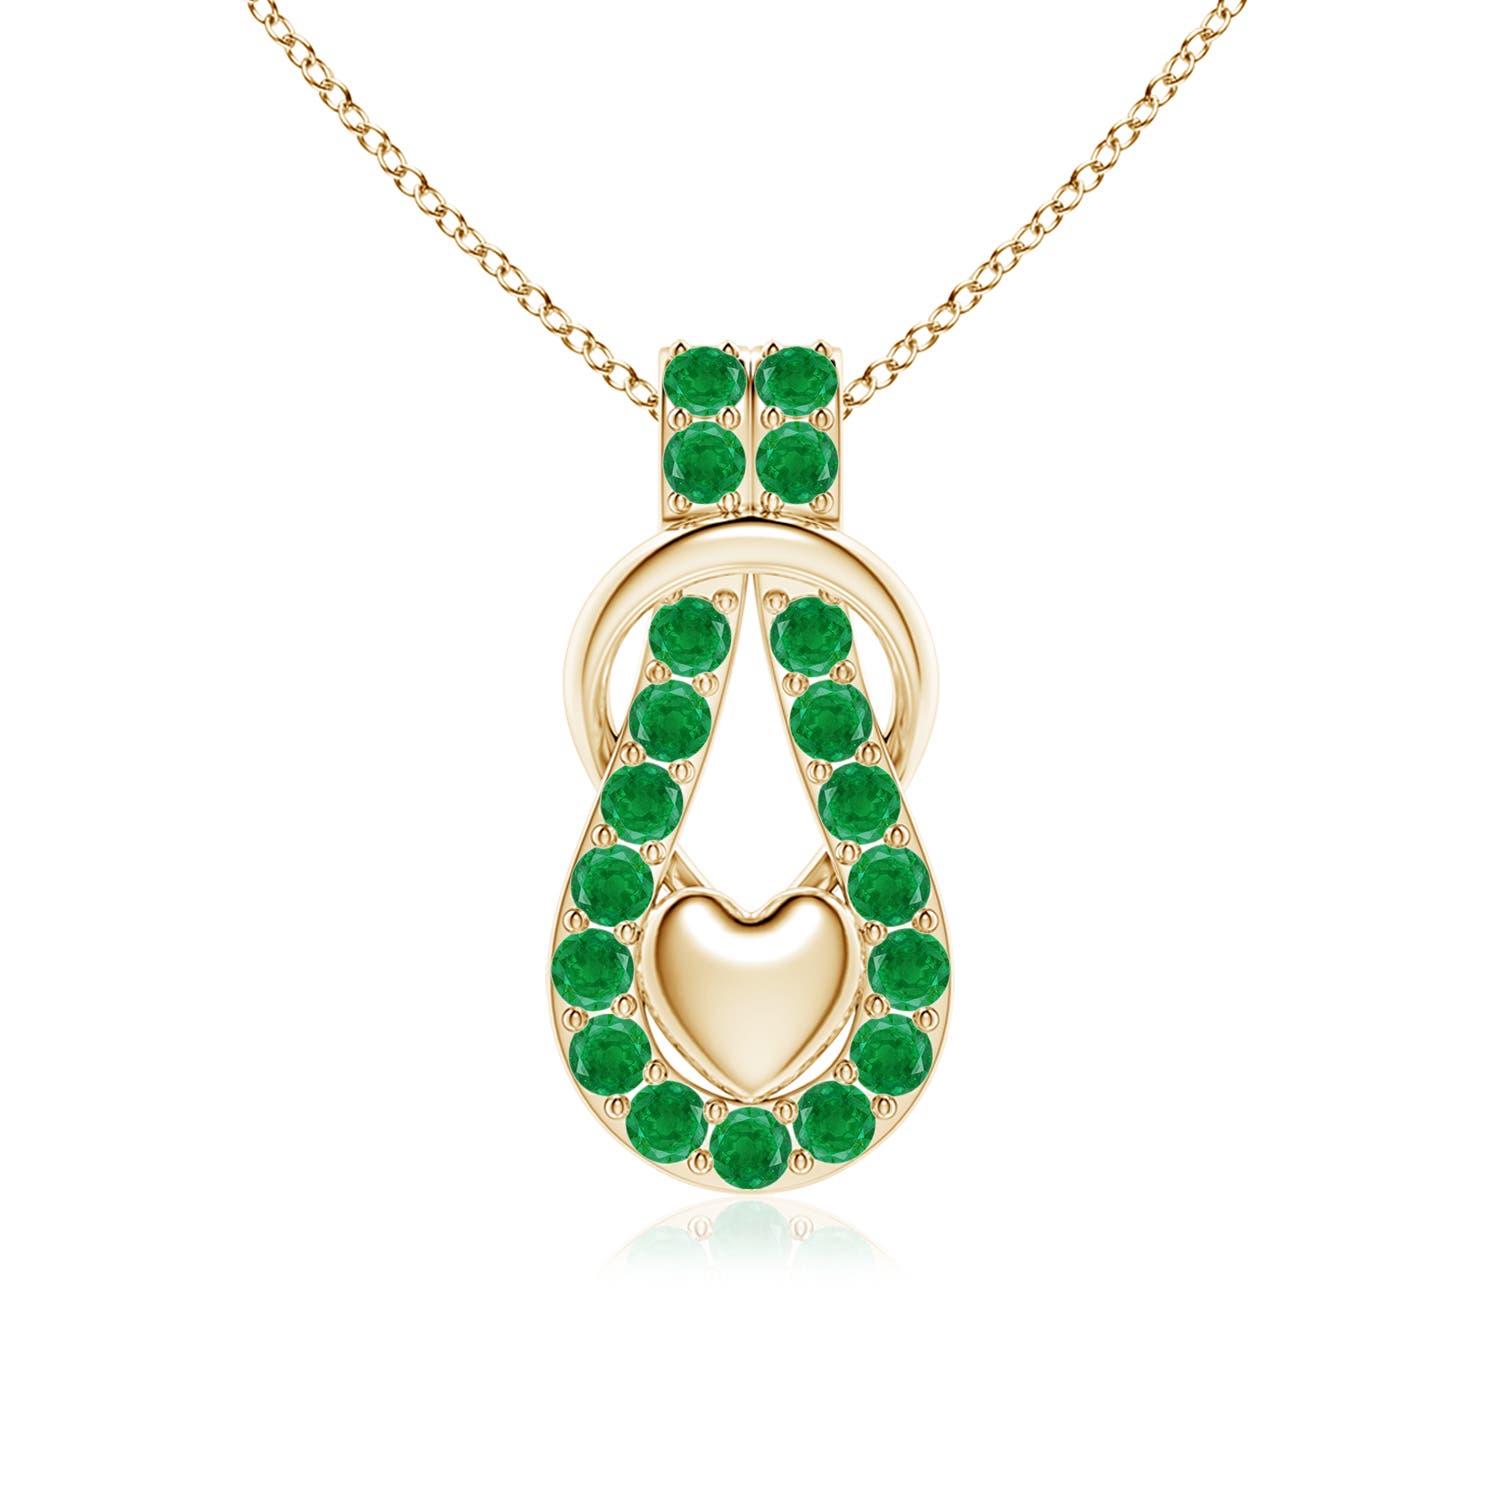 AA - Emerald / 1.2 CT / 14 KT Yellow Gold